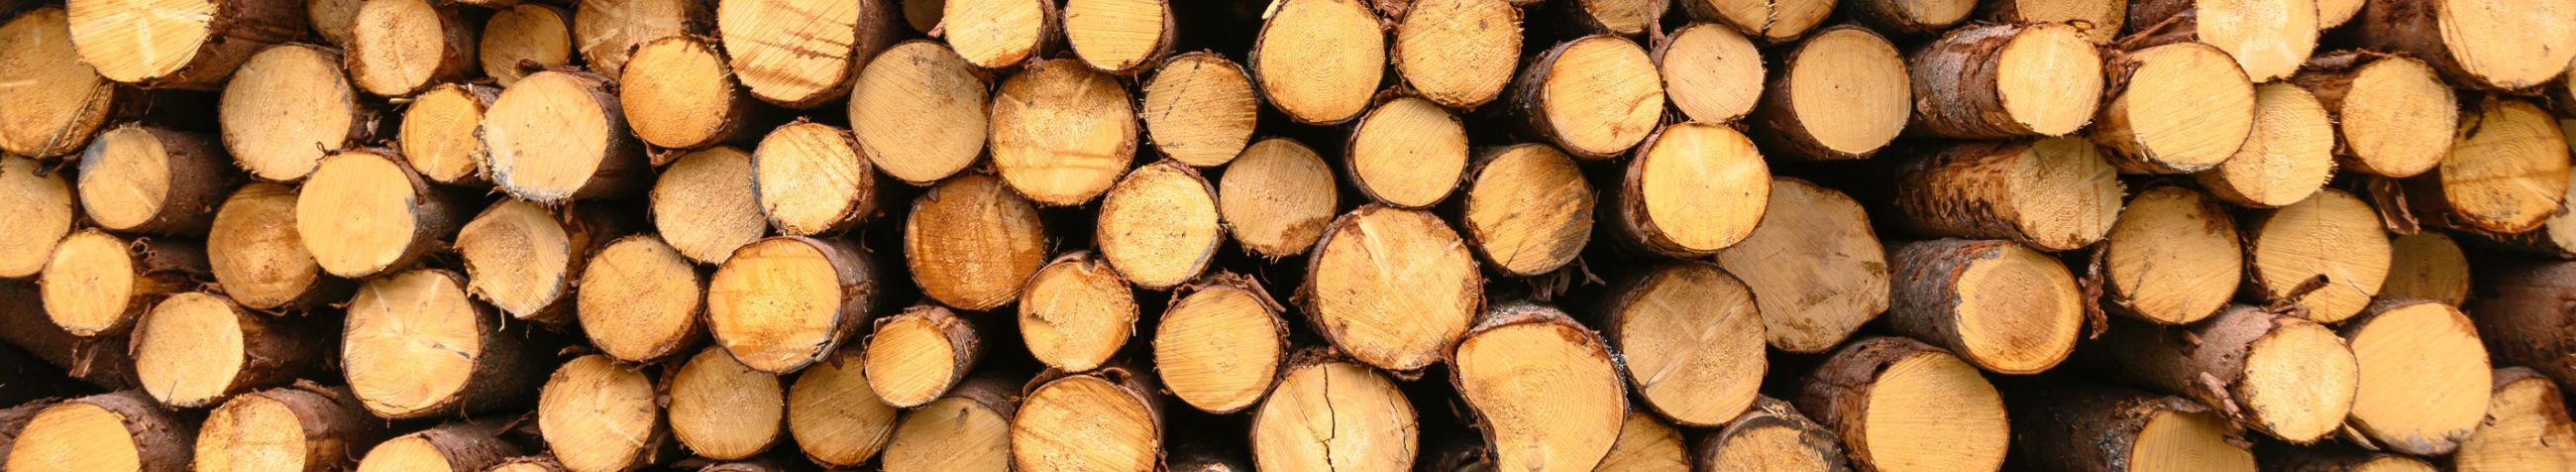 energy and mineral resources, heating materials, fuels, firewood for heating, firewood for fireplace, hopwood in a container, Wood briquettes, heating blocks, sauna trees, Stove Trees